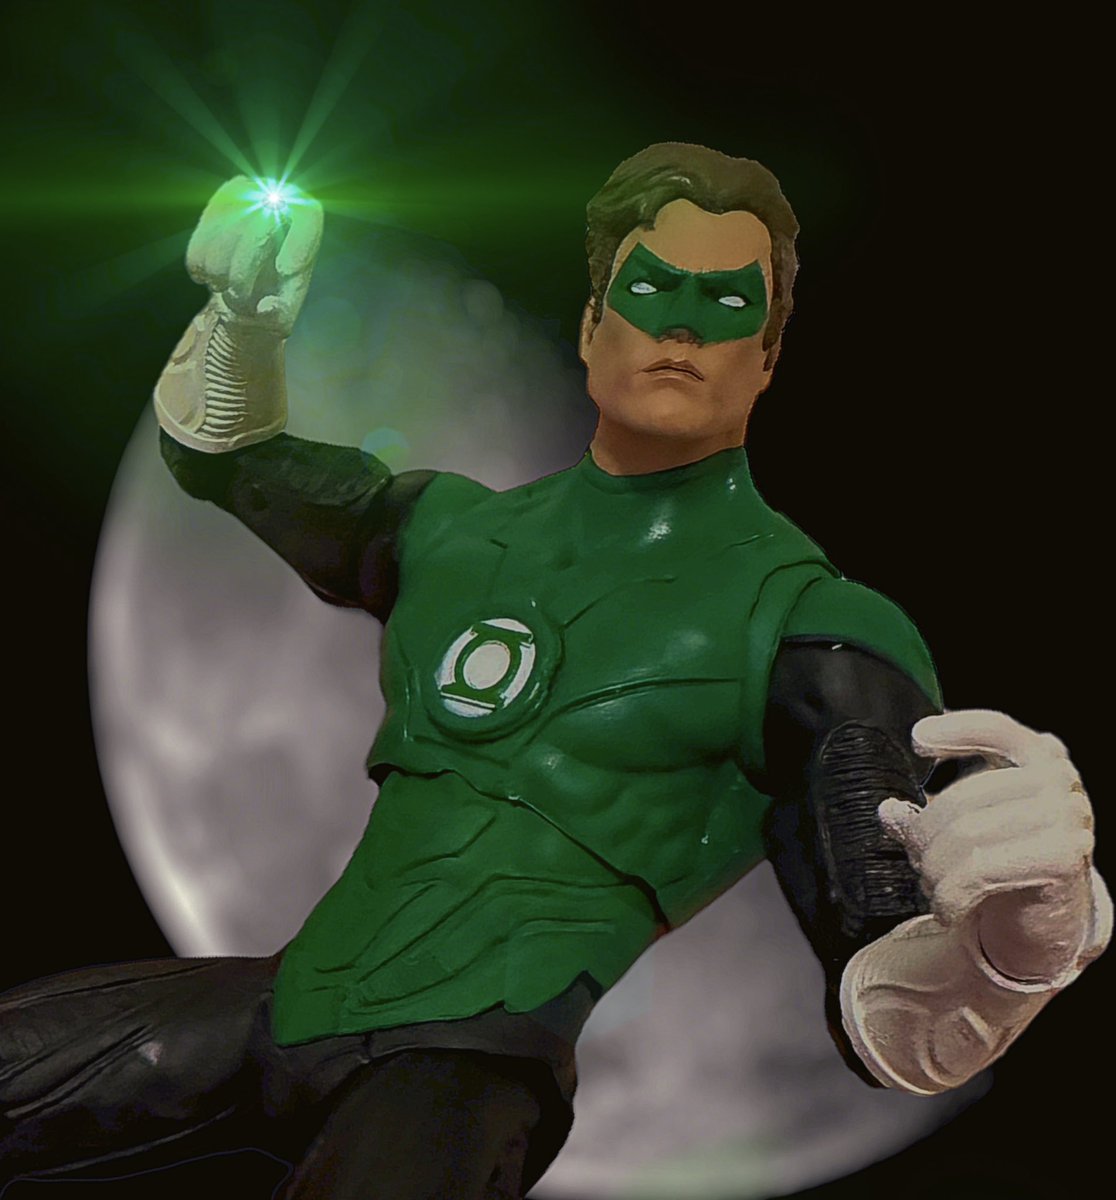 Having fun with this Green Lantern. Really like the sculpt on this one.

#greenlantern #ACTIONFIGURES #toycollector #dcuniverse #toyphotography #toynation #dcactionfigures #toy #toycollection